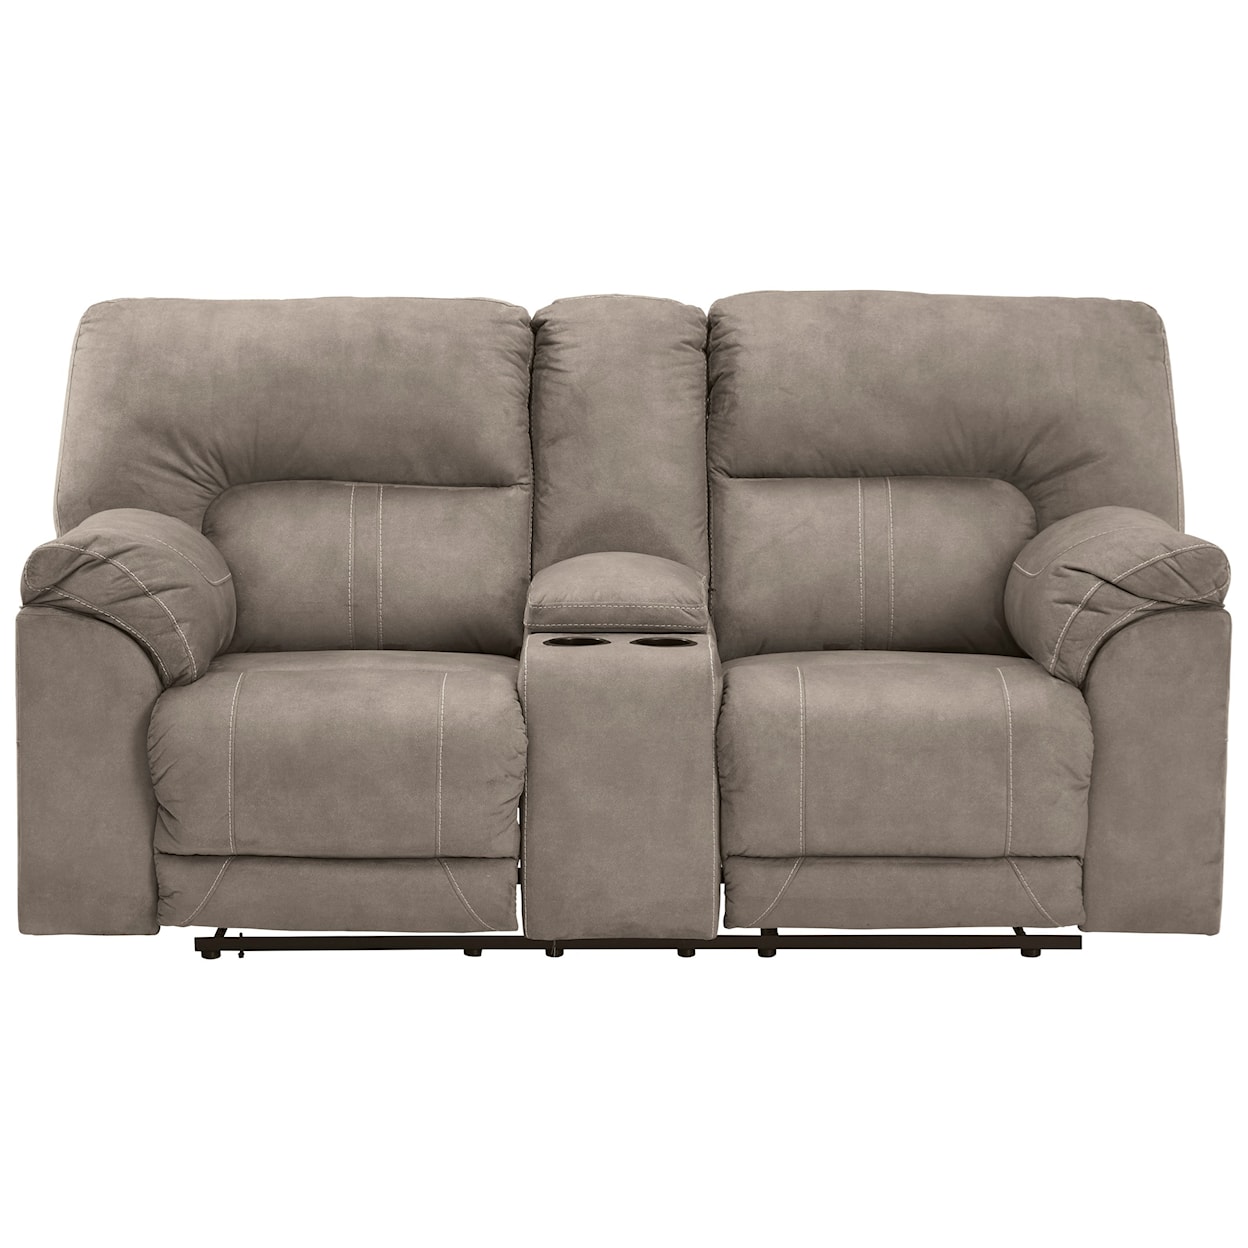 Ashley Furniture Benchcraft Cavalcade Double Reclining Power Loveseat with Console